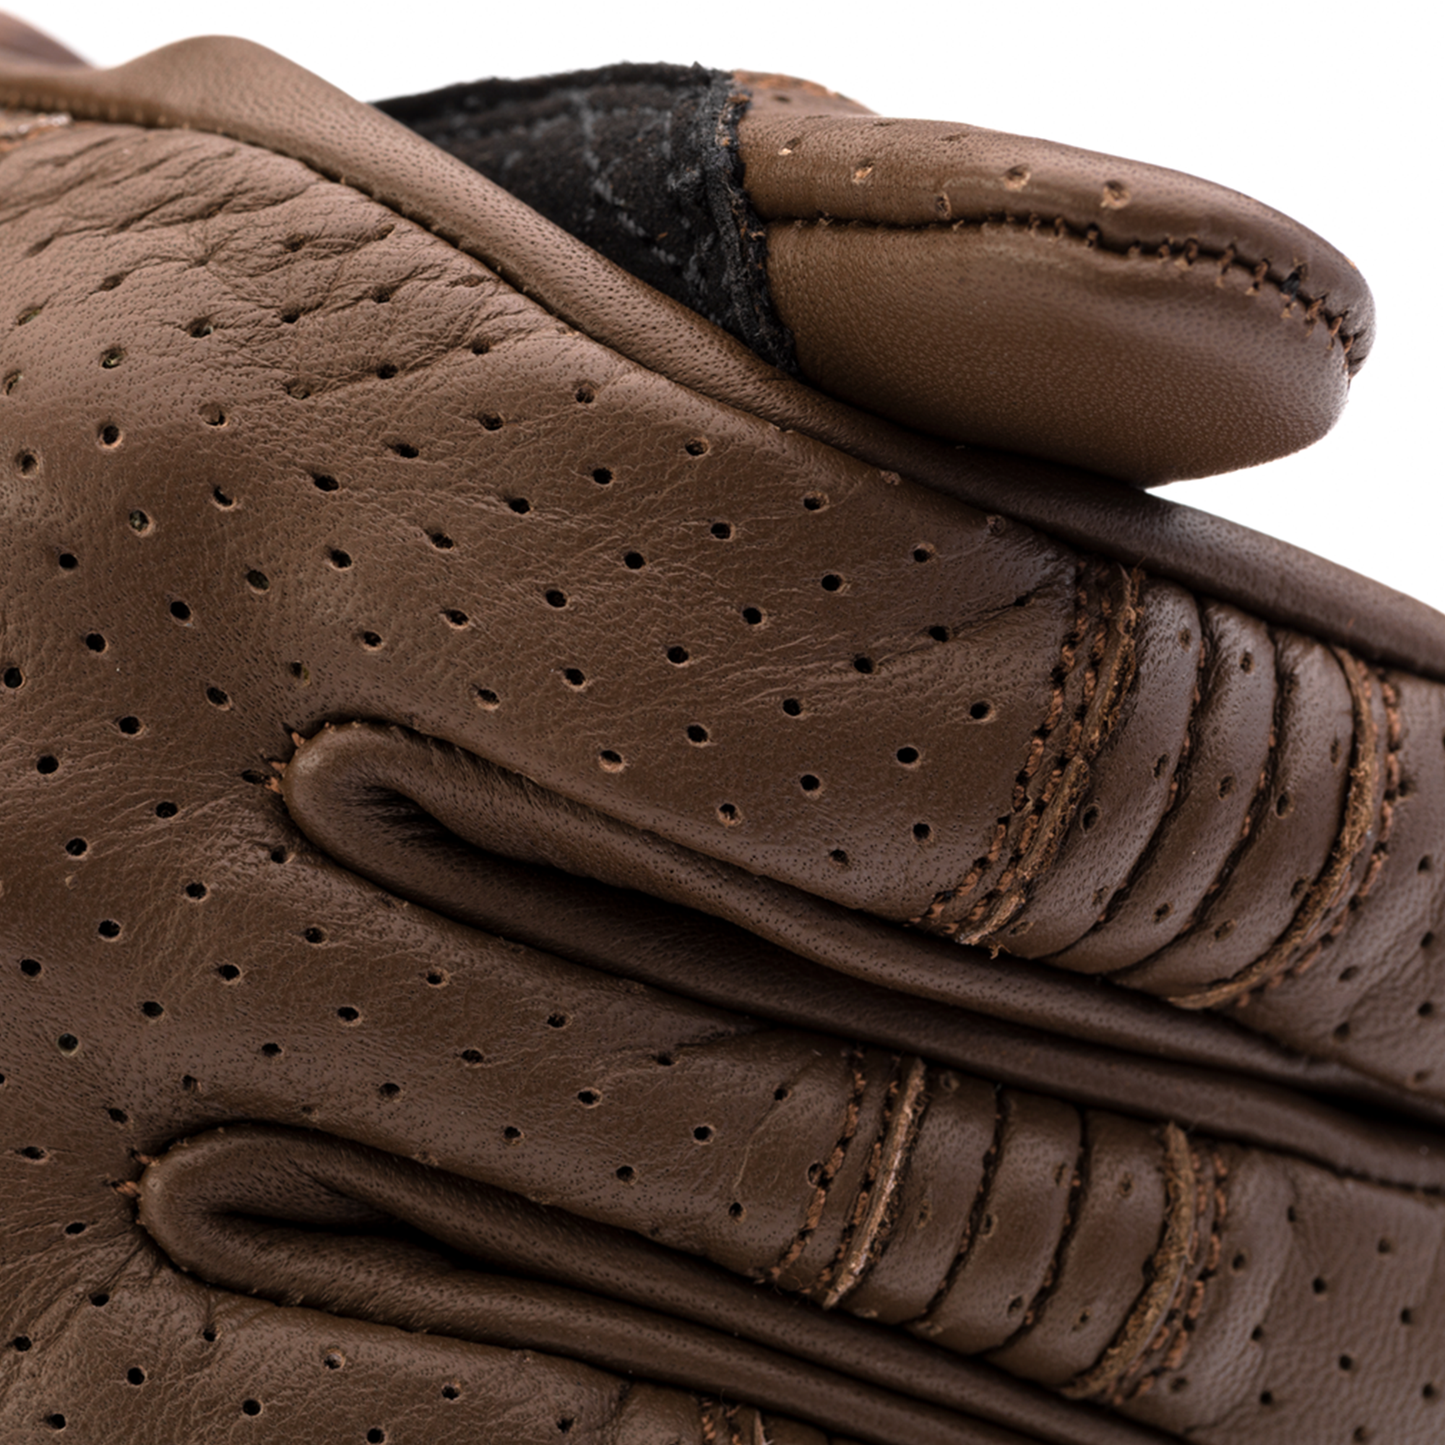 RST Roadster 3 Men's Riding Gloves - CE APPROVED - Brown